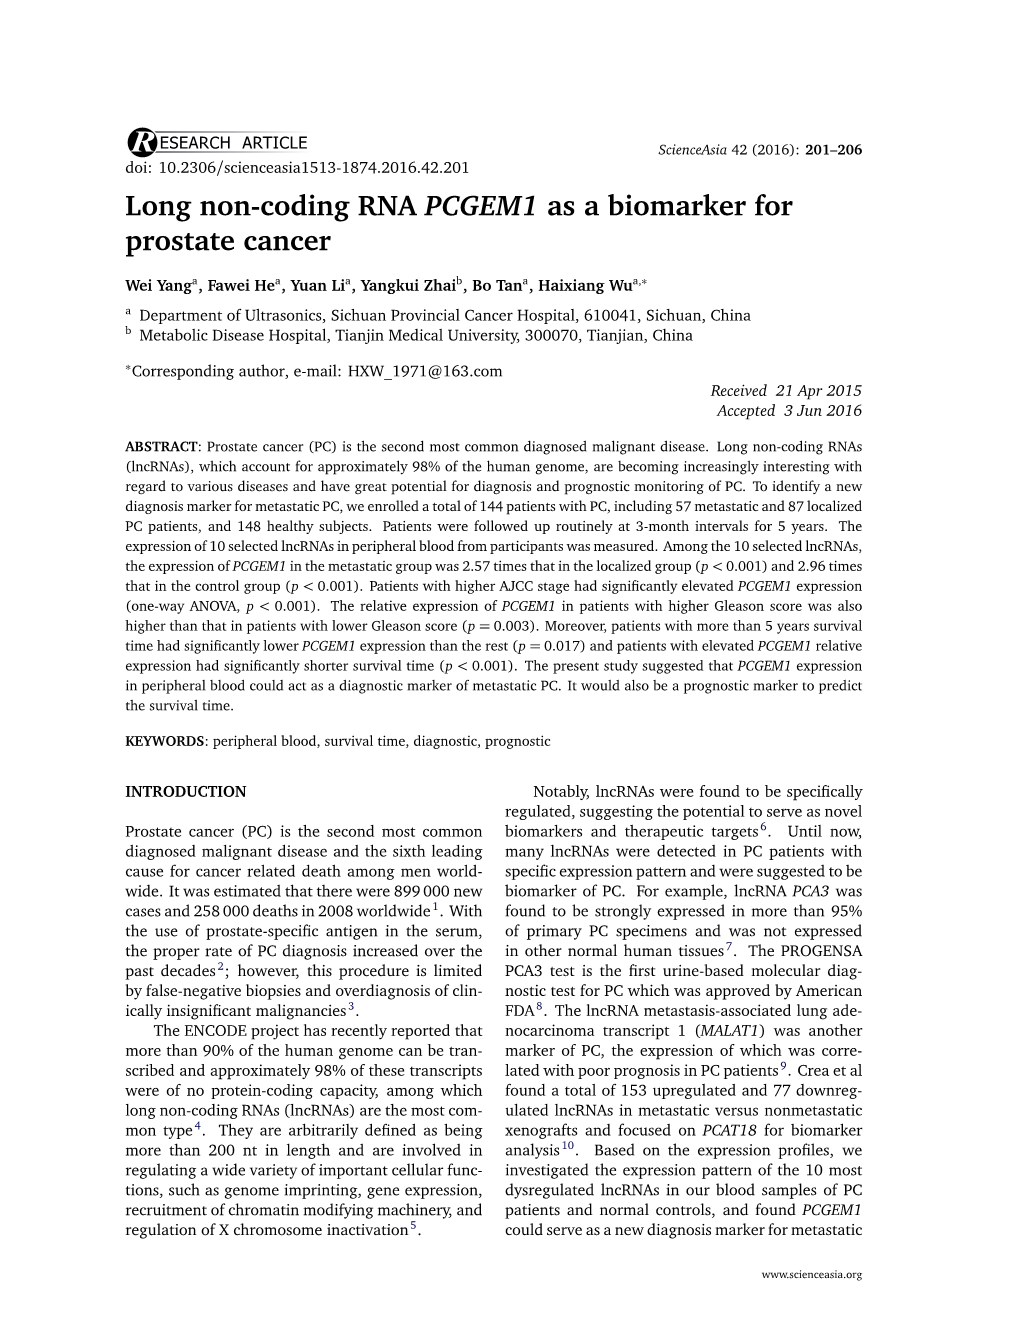 Long Non-Coding RNA PCGEM1 As a Biomarker for Prostate Cancer